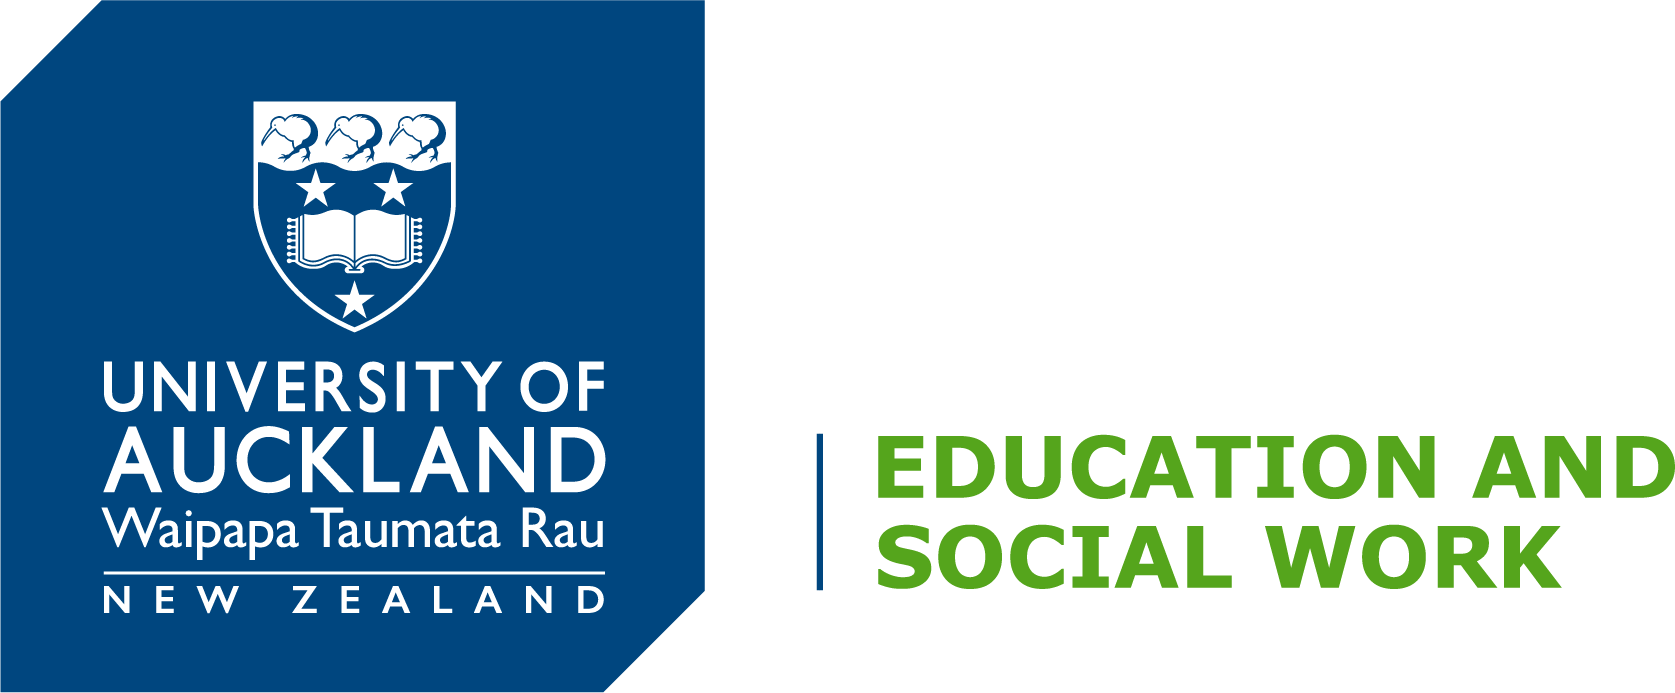 University of Auckland Faculty of Education and Social Work